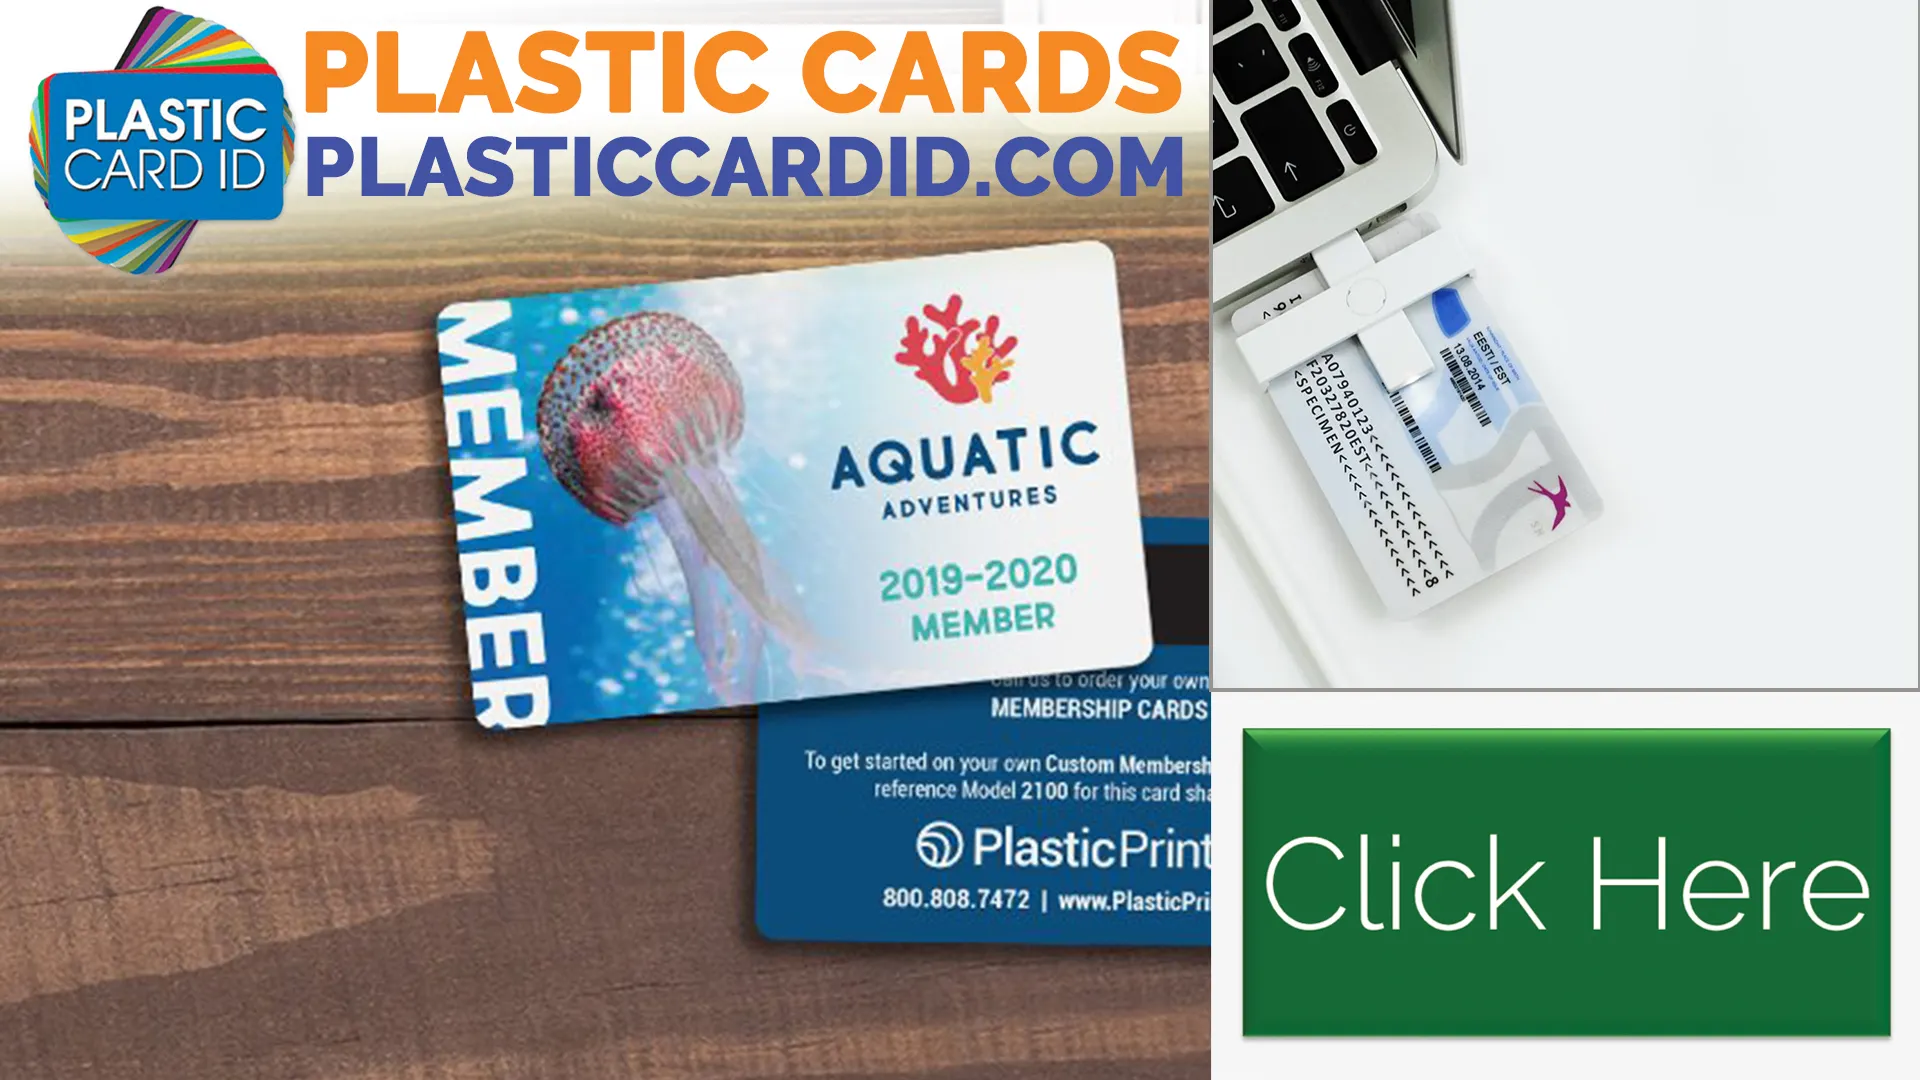 Welcome to Plastic Card ID
: Your Premier Partner for Logo and Design Integration in Litho Printing